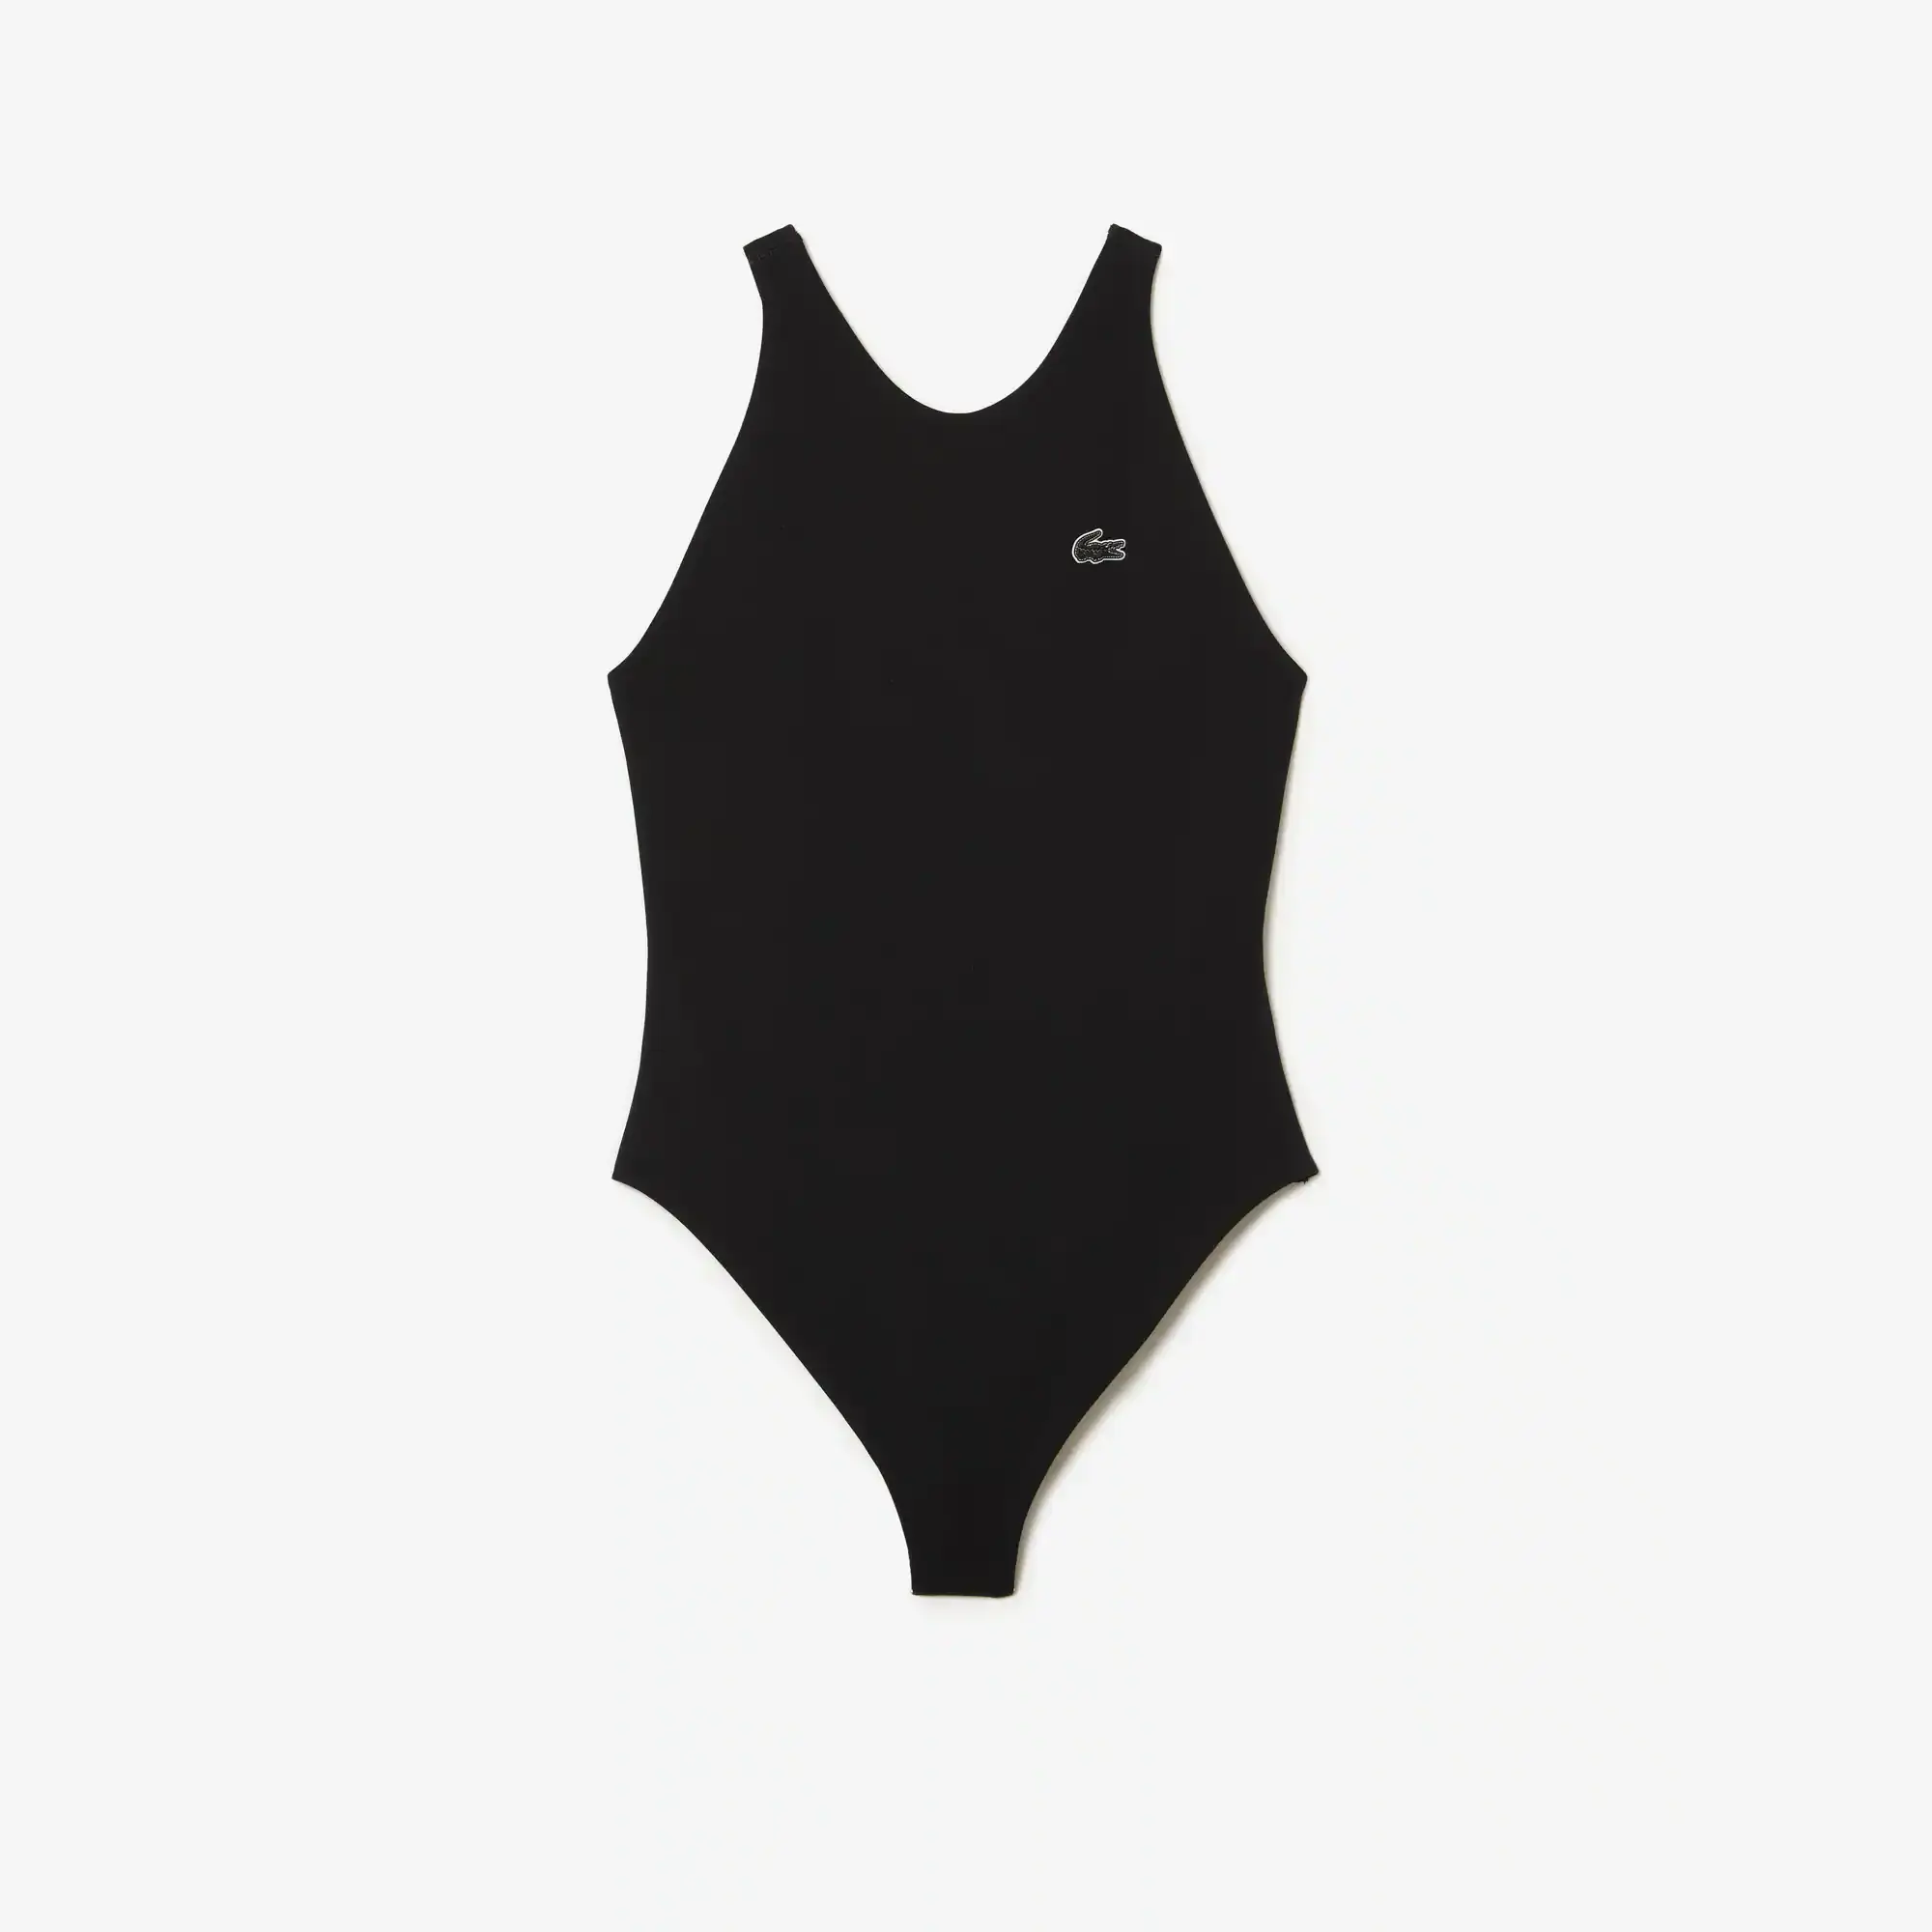 Lacoste Women’s One-Piece Recycled Polyamide Swimsuit. 2